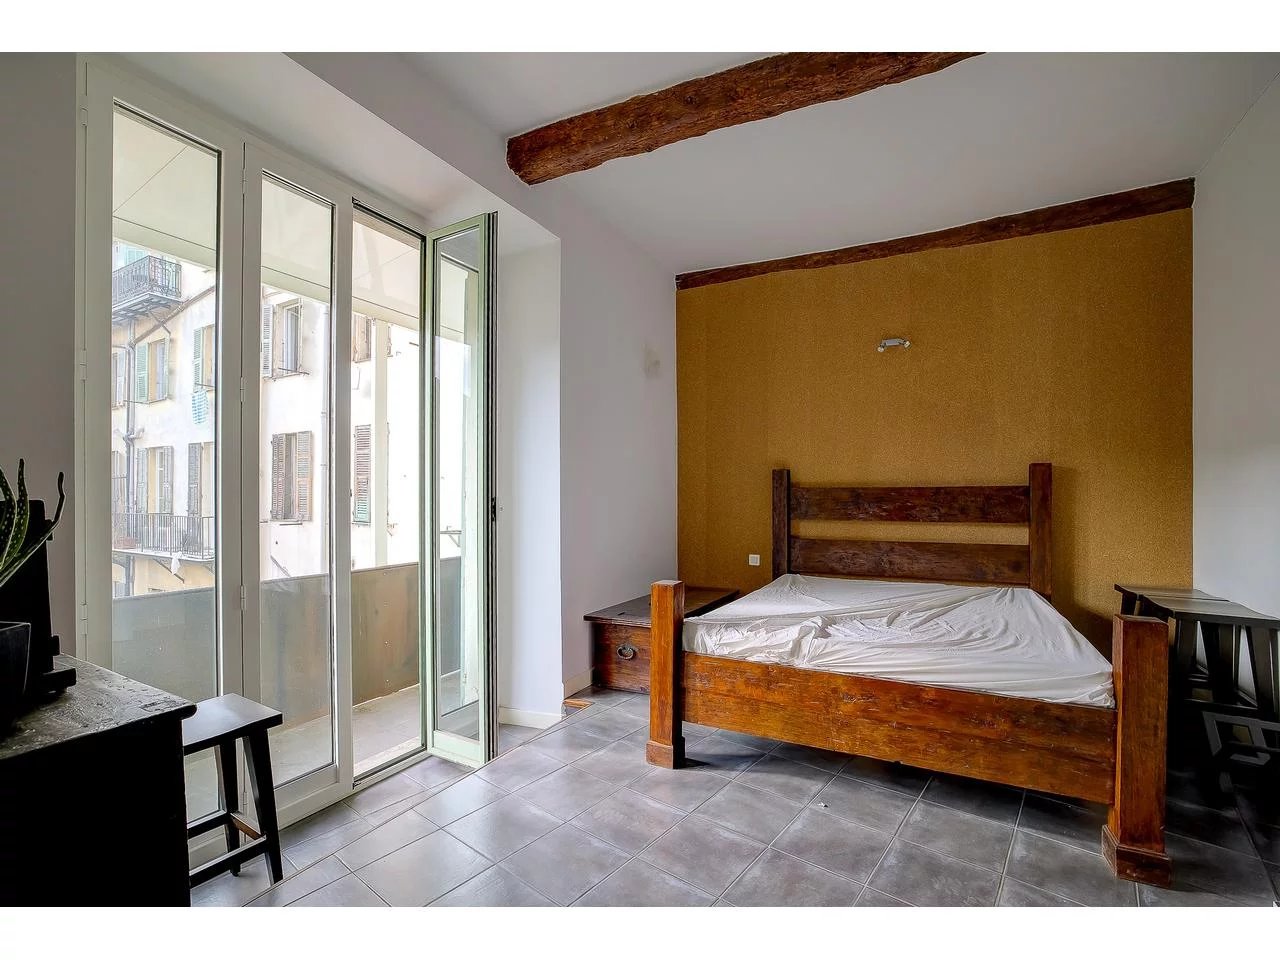 Appartement  5 Rooms 128m2  for sale  1 340 000 €